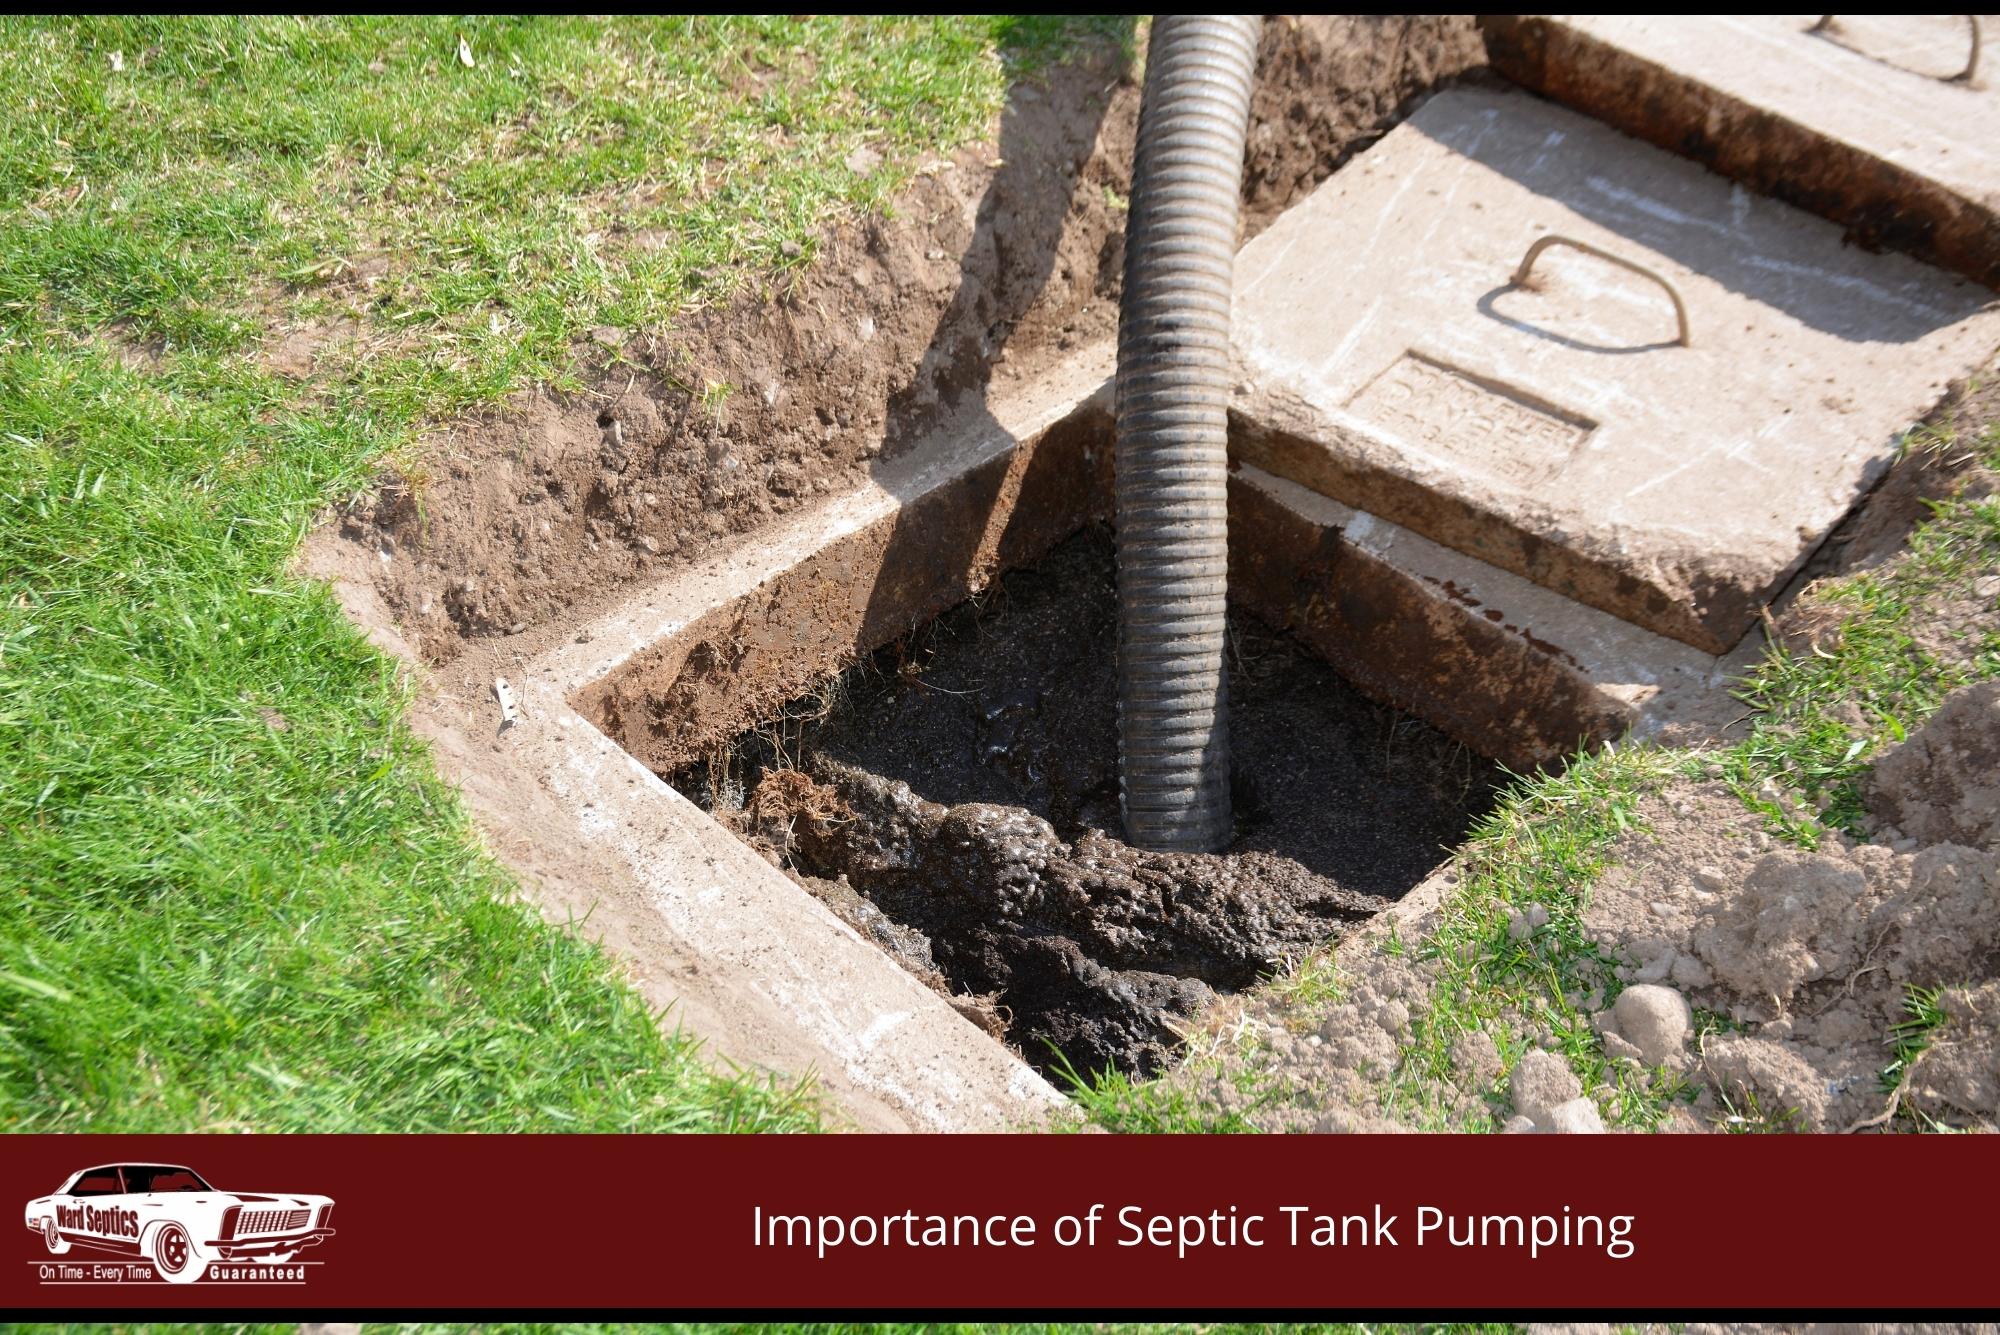 Importance of Septic Tank Pumping